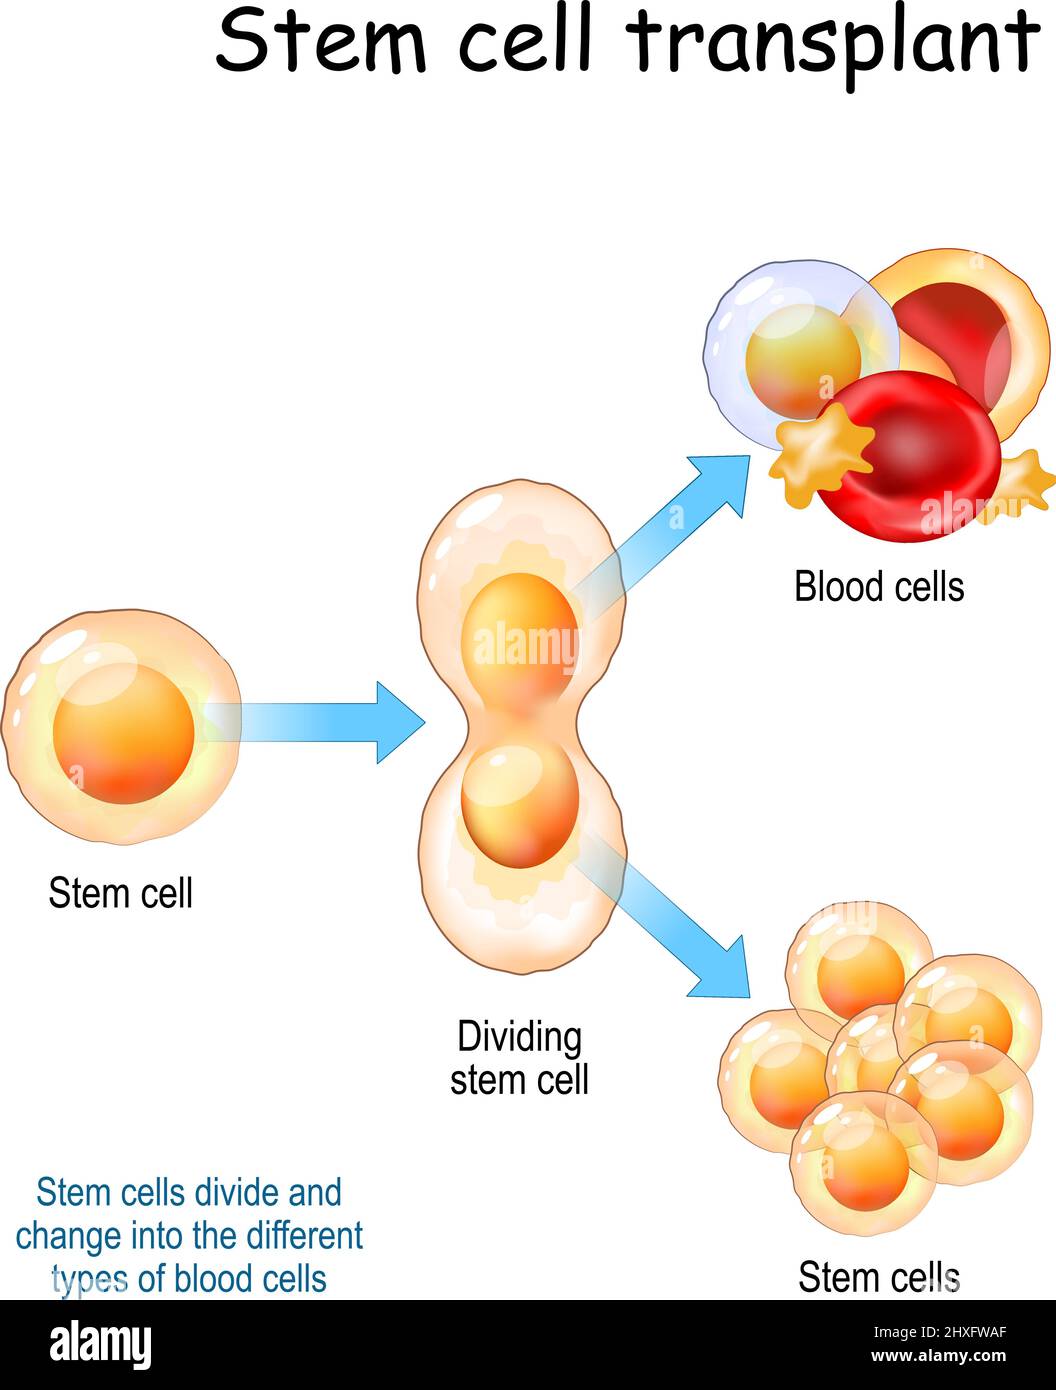 Stem cell transplant. Stem cells divide and change into the different types of blood cells. Vector illustration Stock Vector